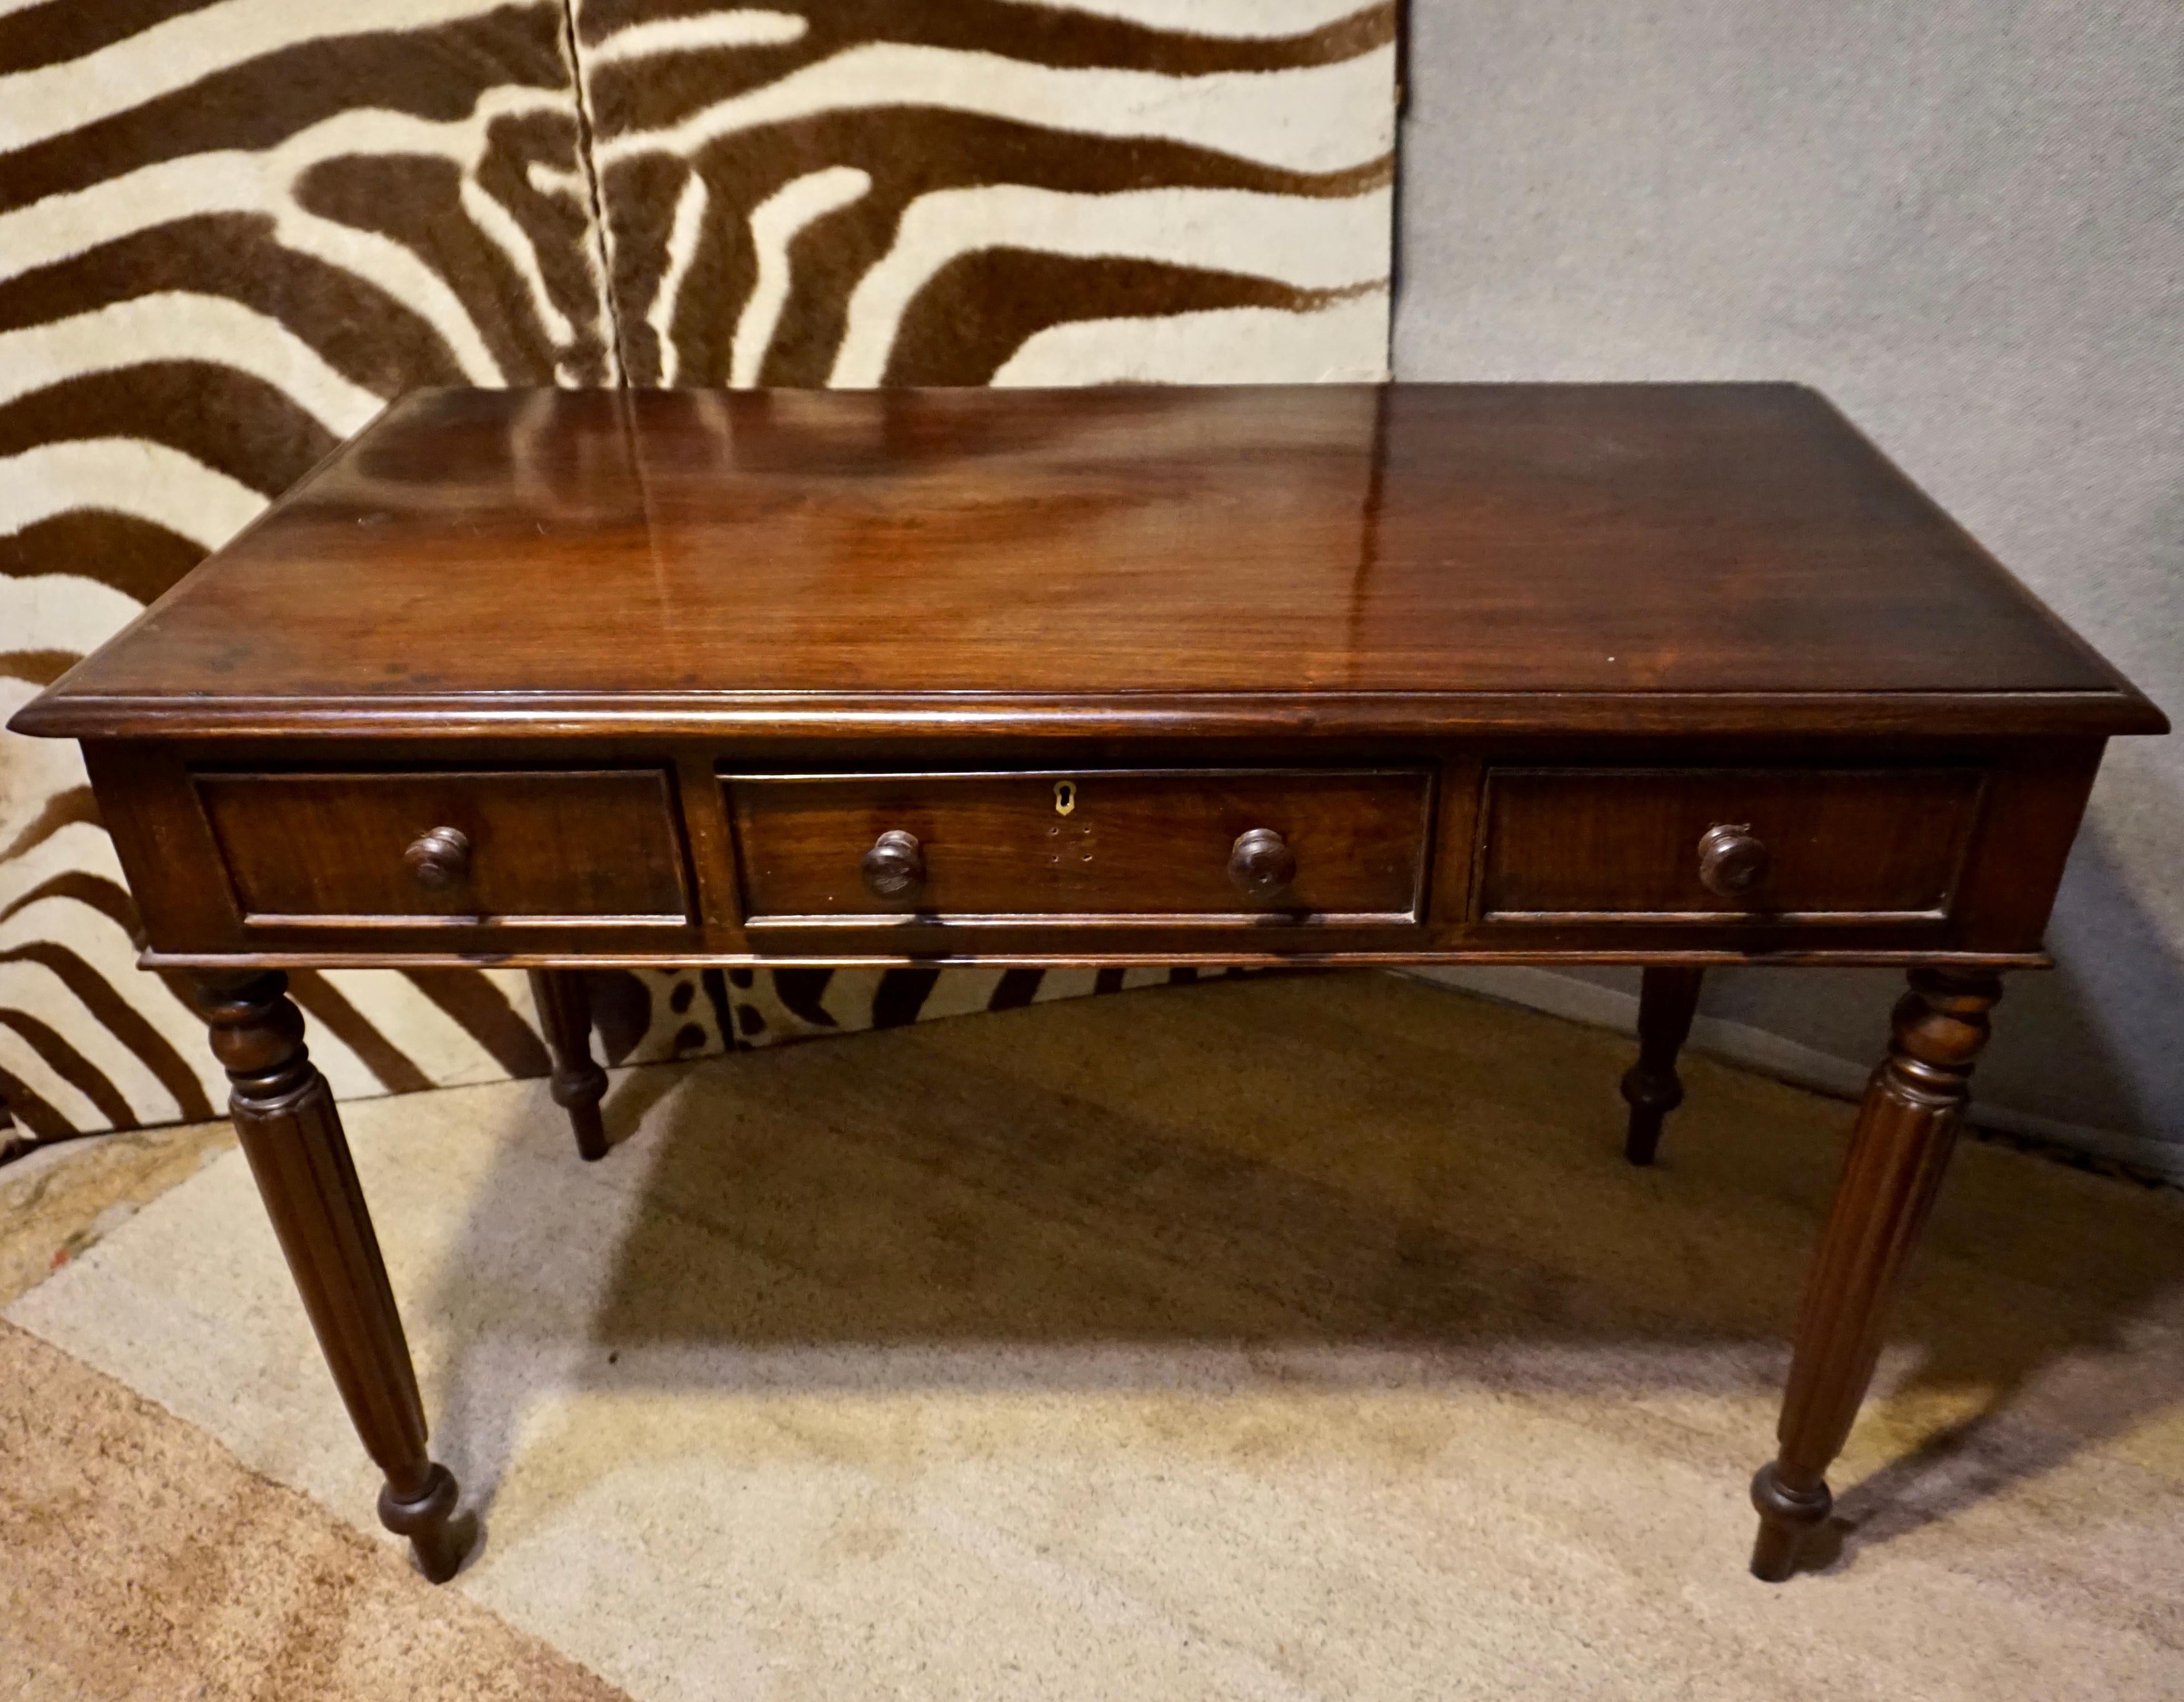 Circa 1890

Solid Rosewood Colonial writing desk in good condition. Old growth timber is visible as the top is constructed from a single piece of Rosewood that shows beautiful grain. Legs are hand carved. Knobs have been replaced with central knob